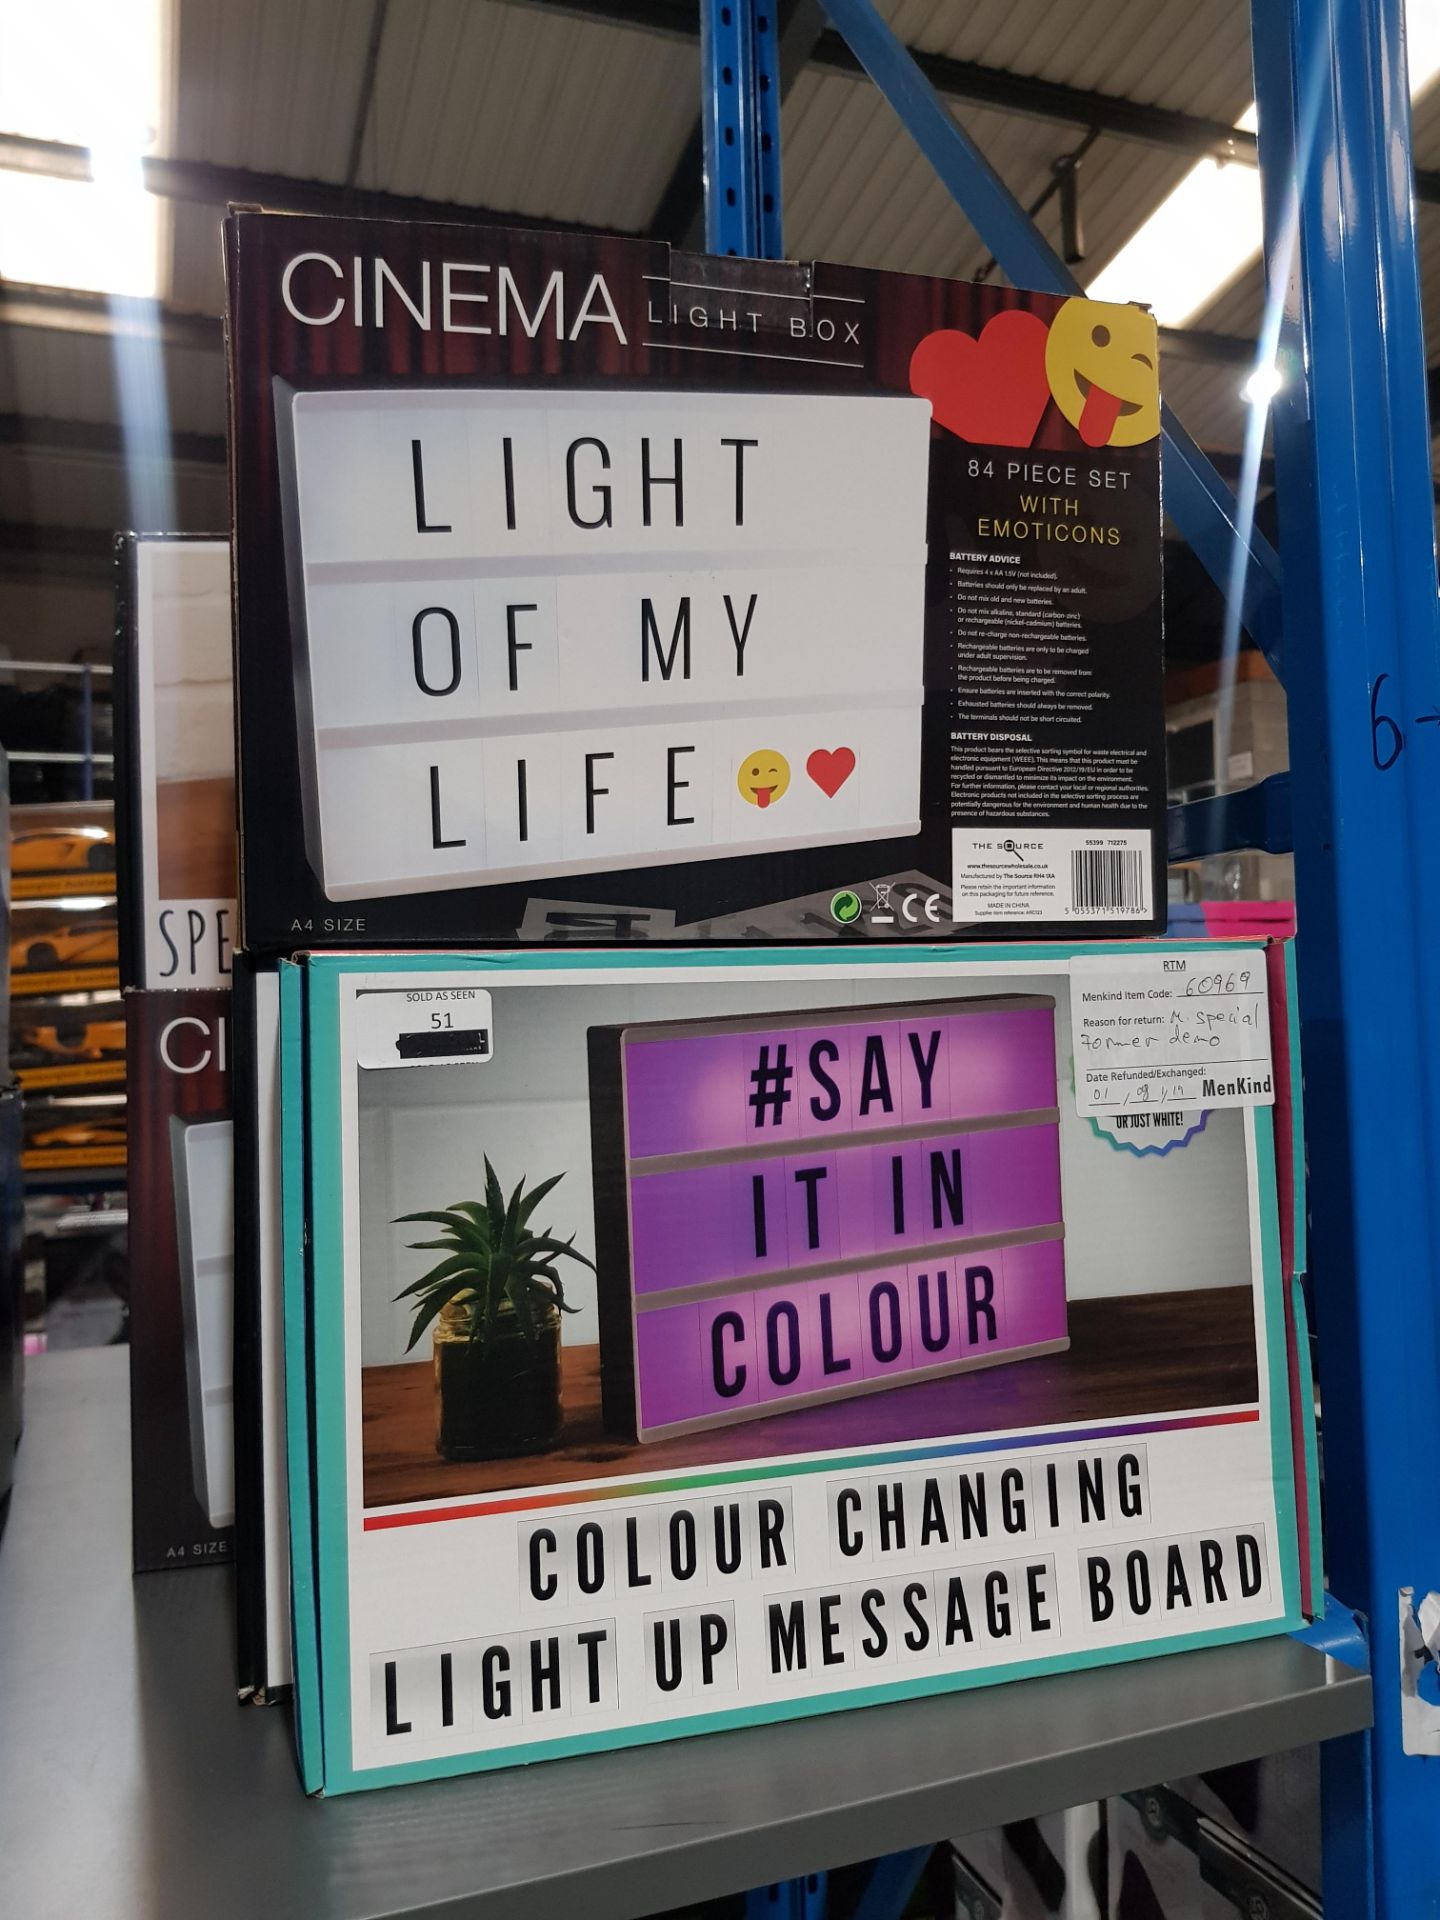 14 X MIXED STYLE LIGHTBOX Further Information Returned items carry 'RTM' stickers